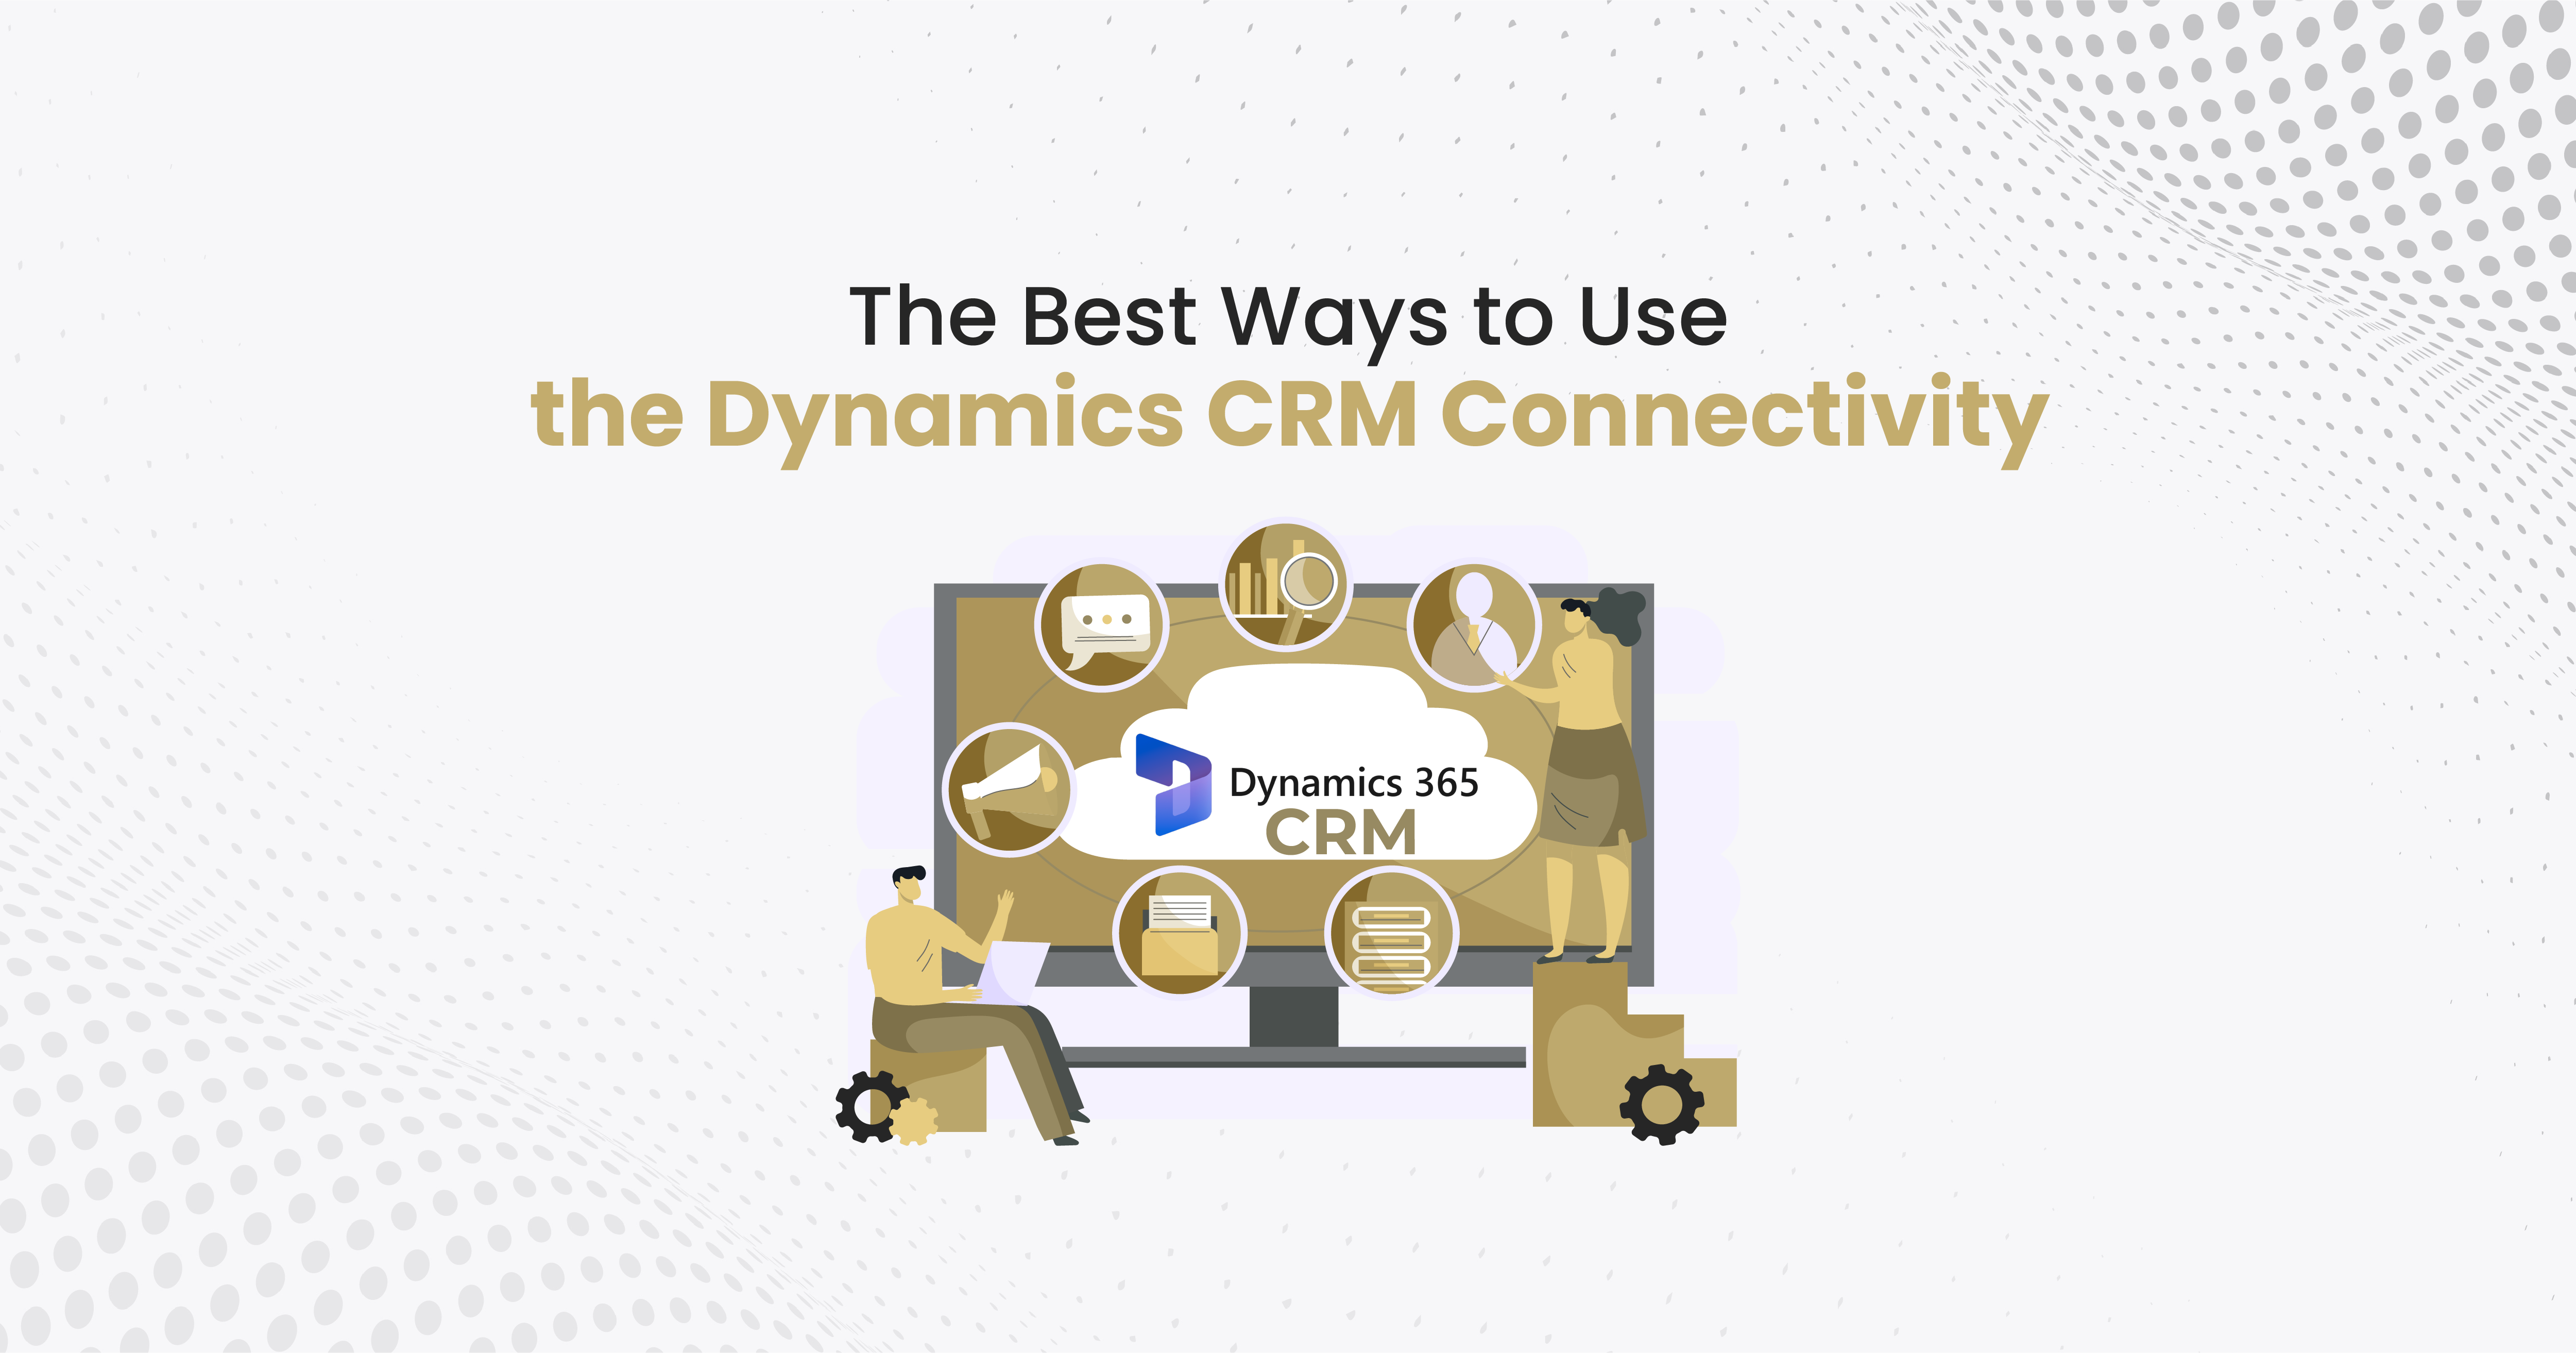 The Best Ways to Use Dynamics CRM Connectivity